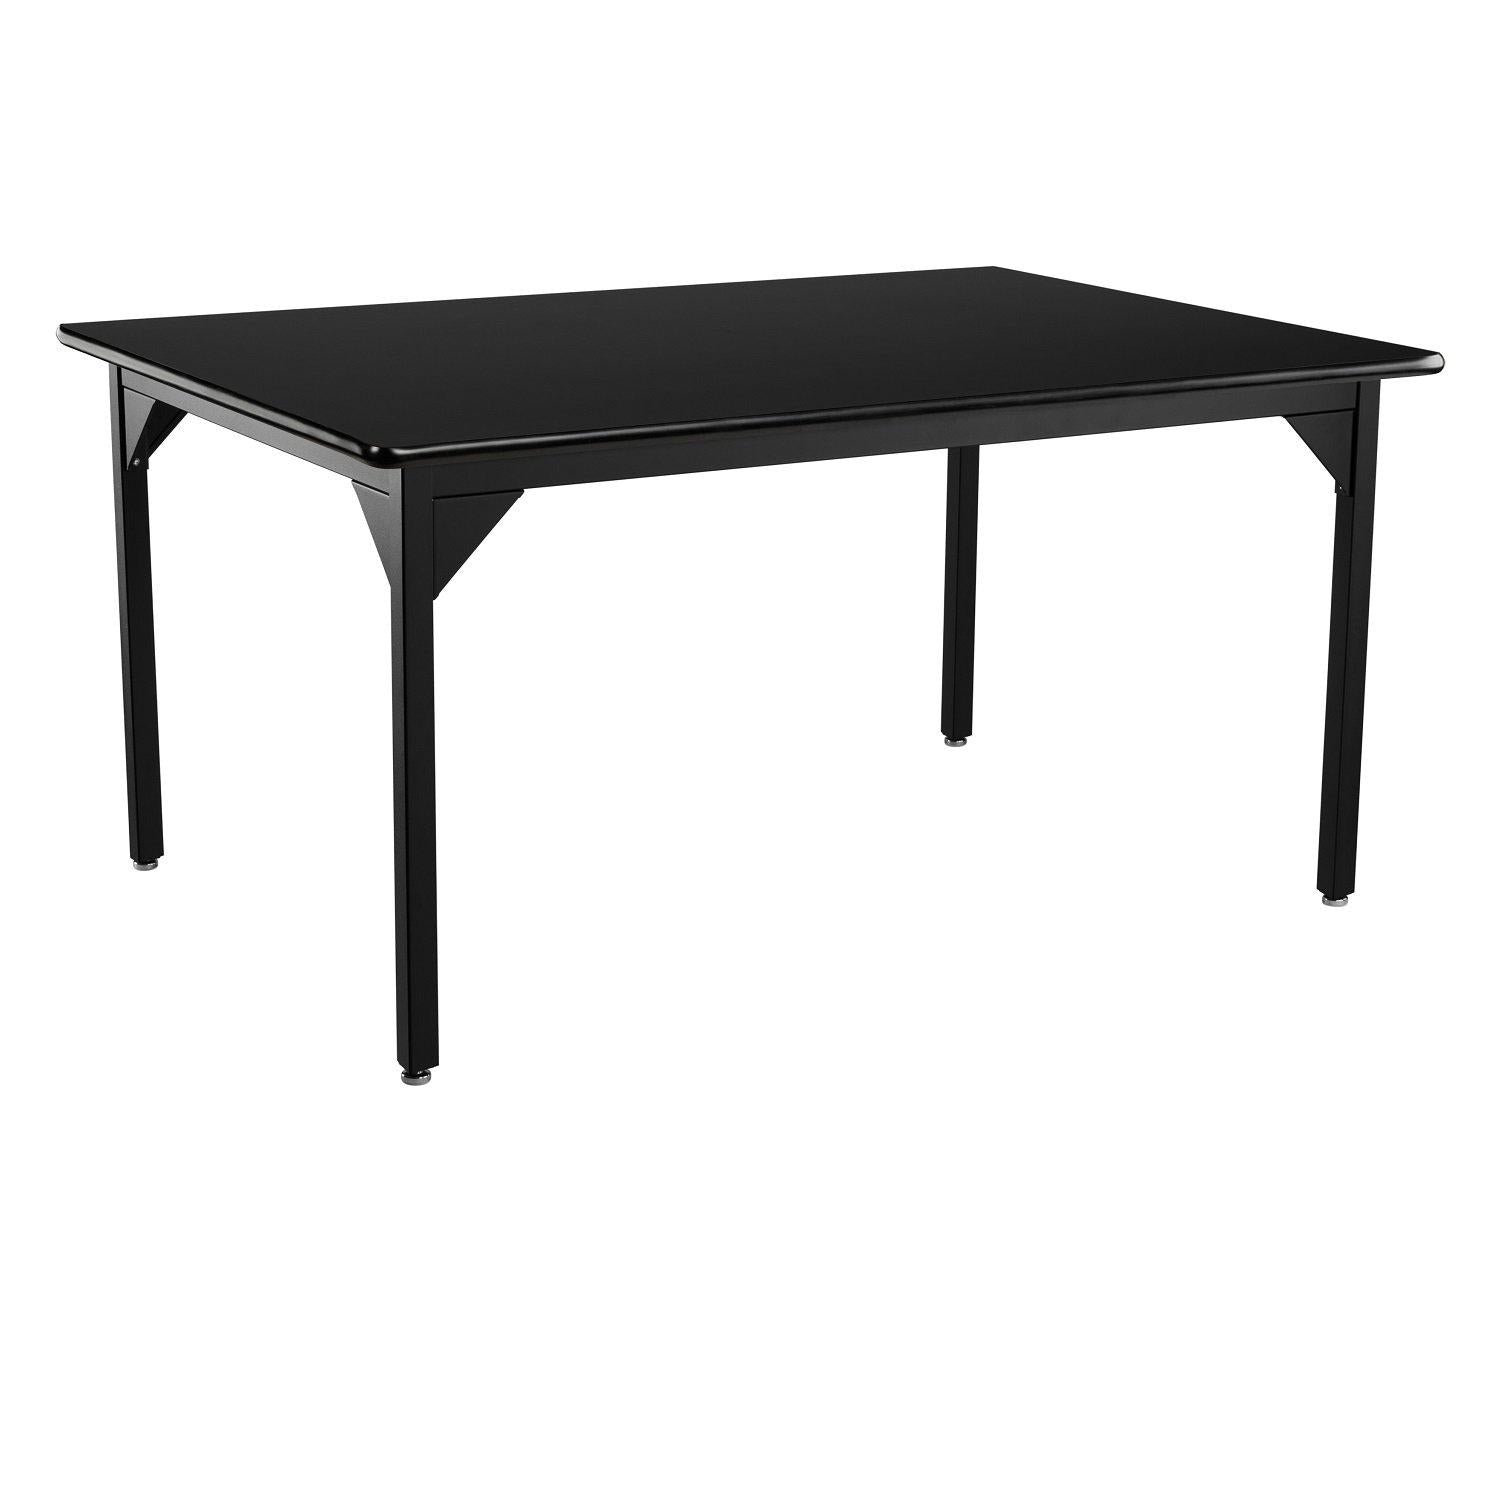 Heavy-Duty Fixed Height Utility Table, Black Frame, 42" x 60", High-Pressure Laminate Top with T-Mold Edge